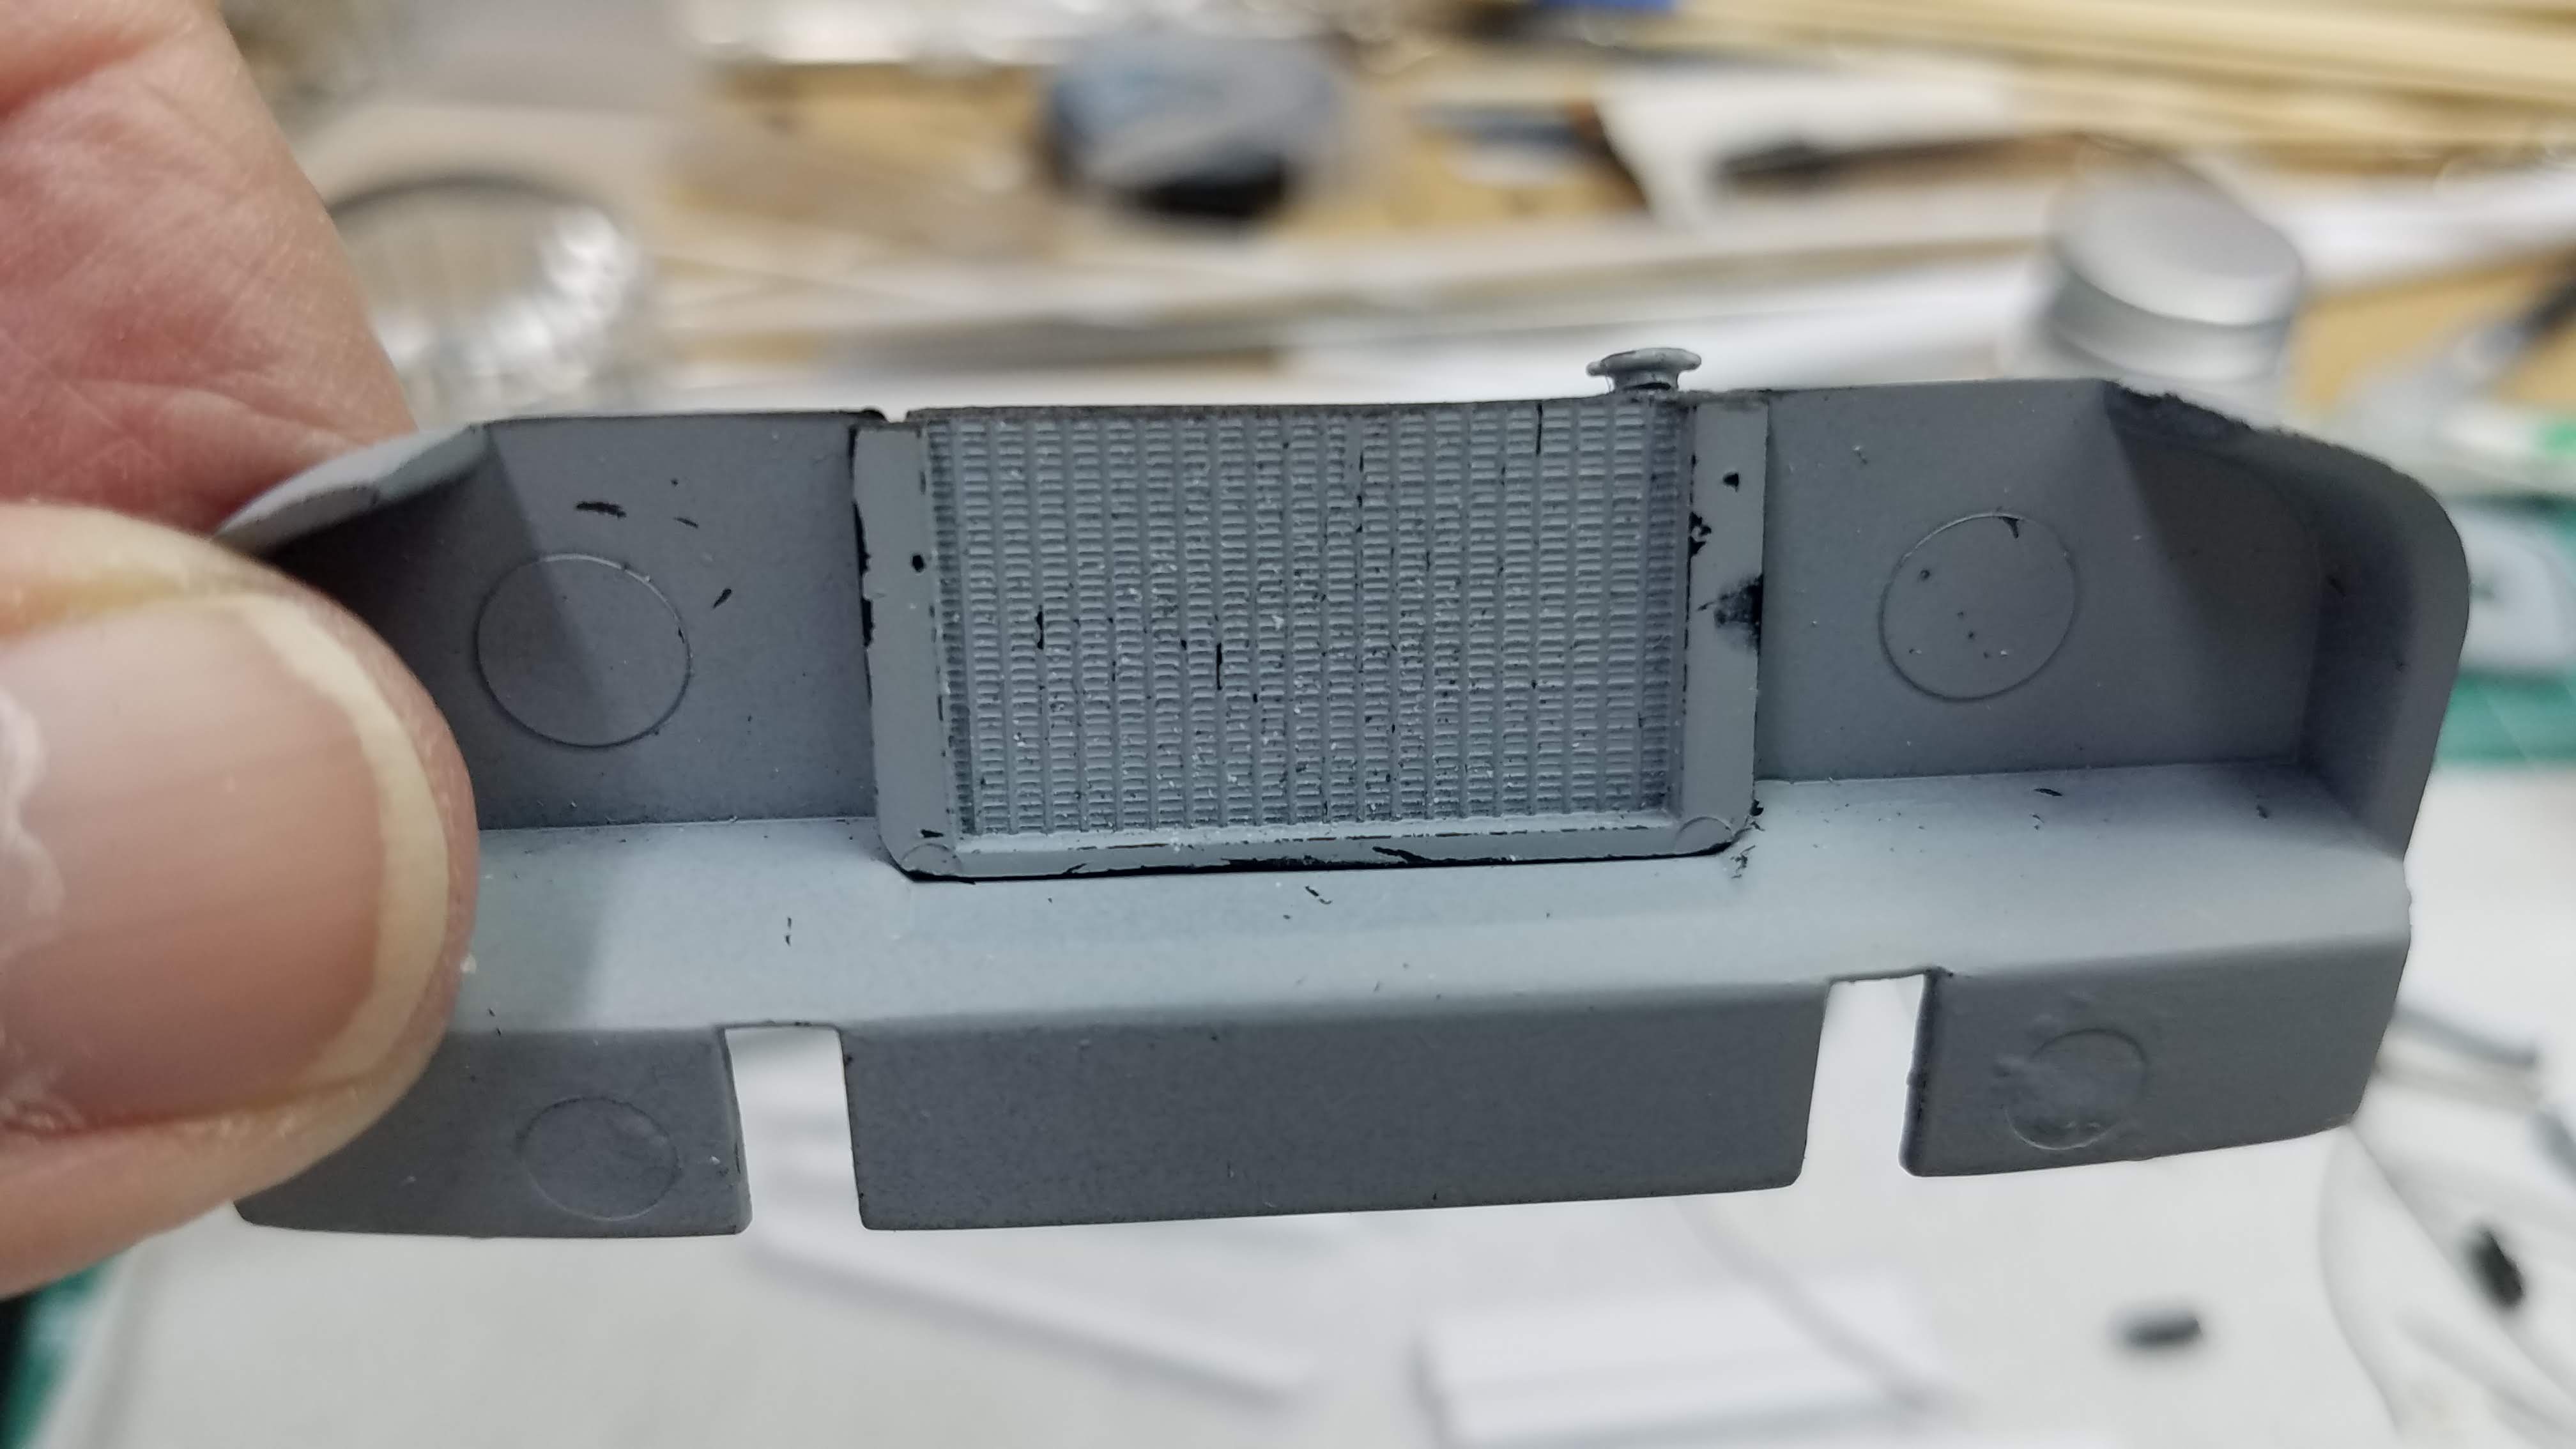 Scratch built radiator fits perfectly in the opening, front view